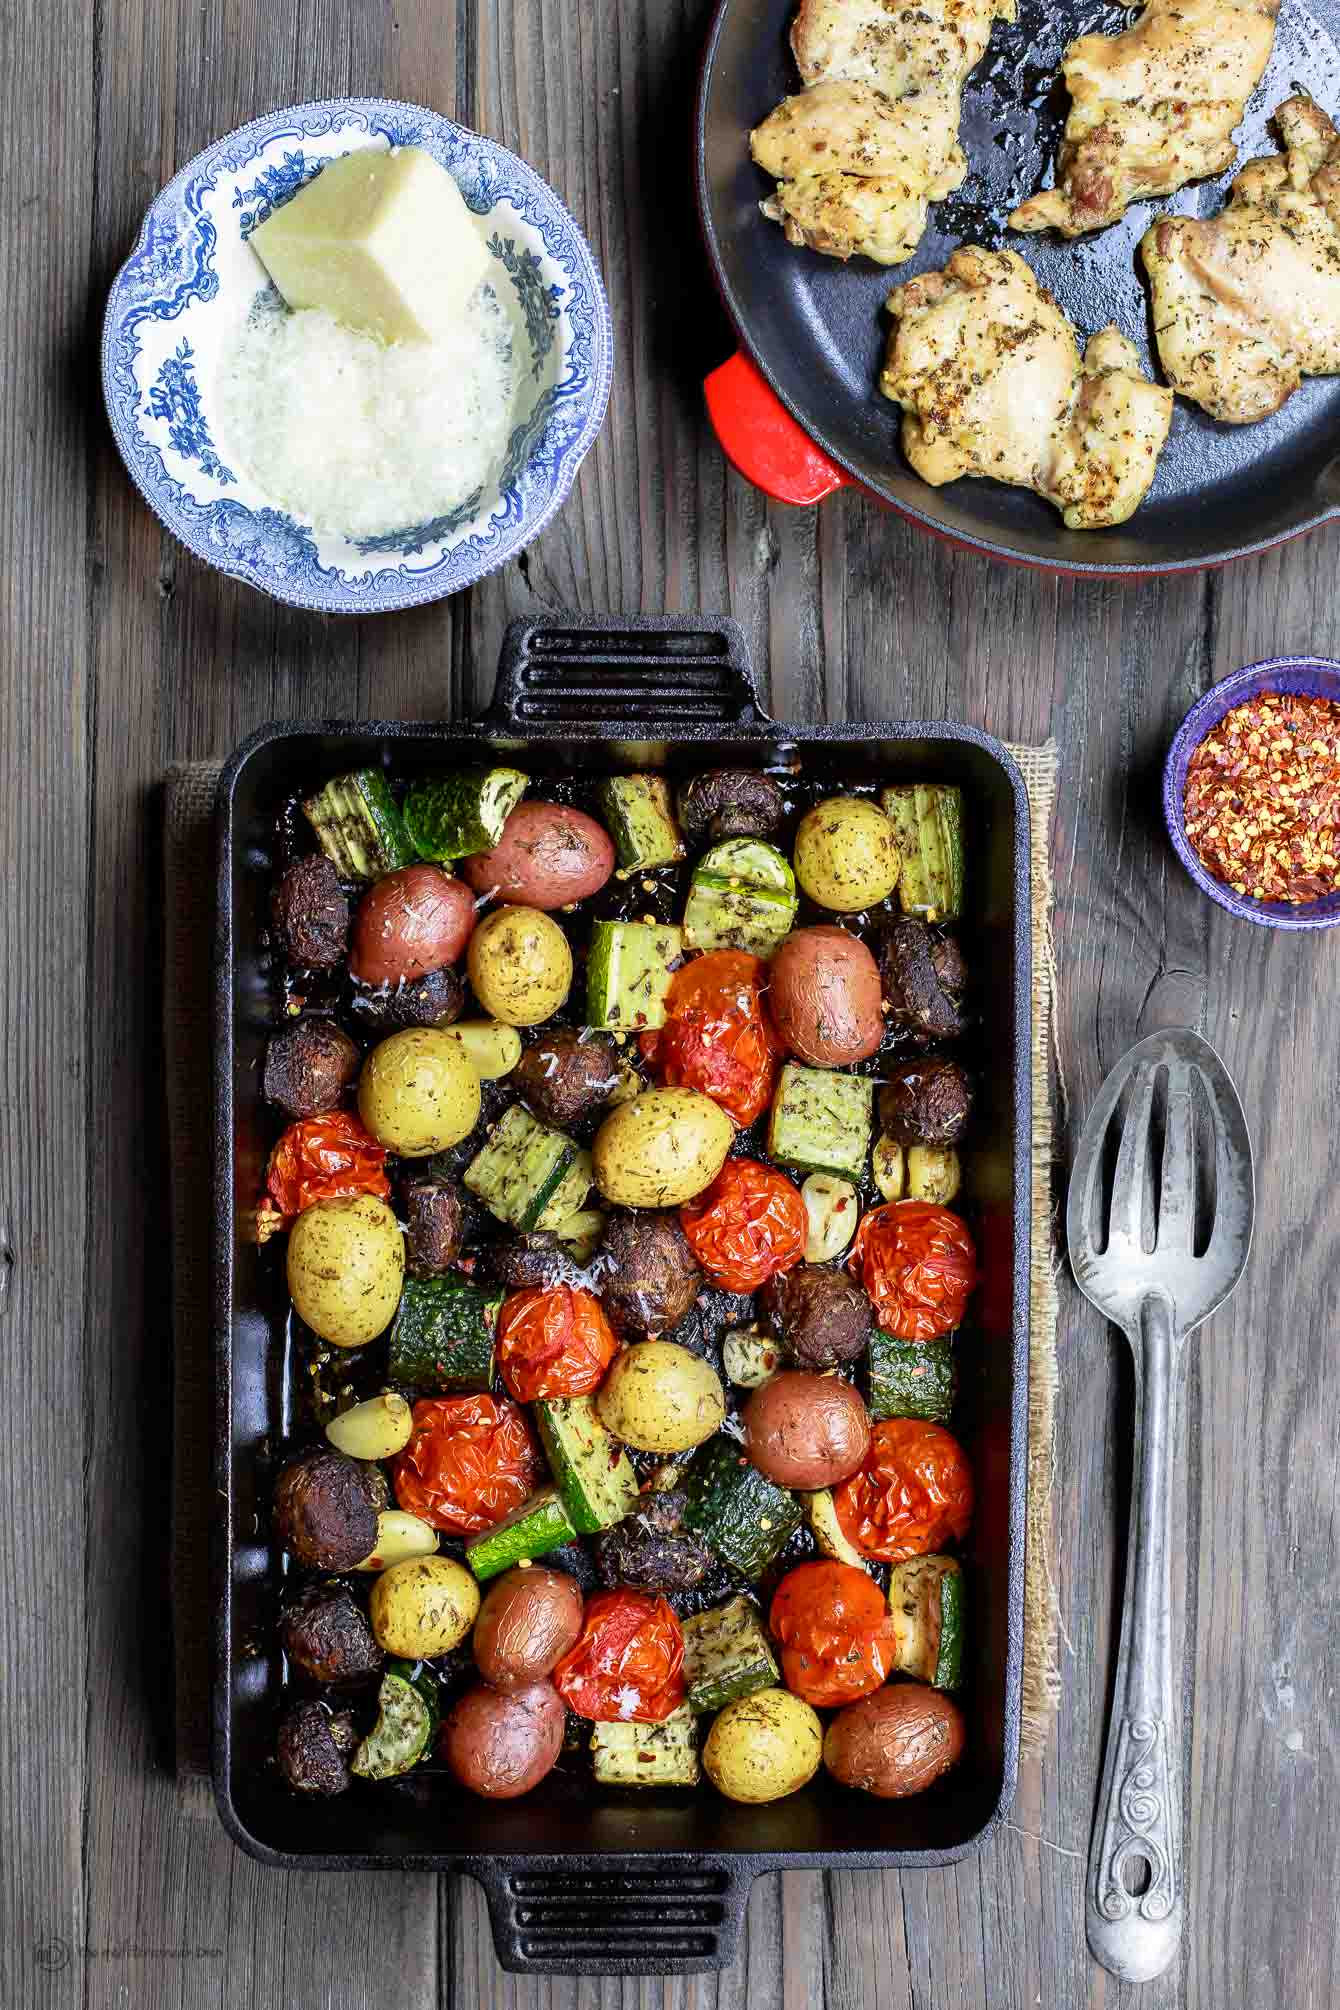 Roasted Vegetables In The Oven
 BEST Italian Oven Roasted Ve ables